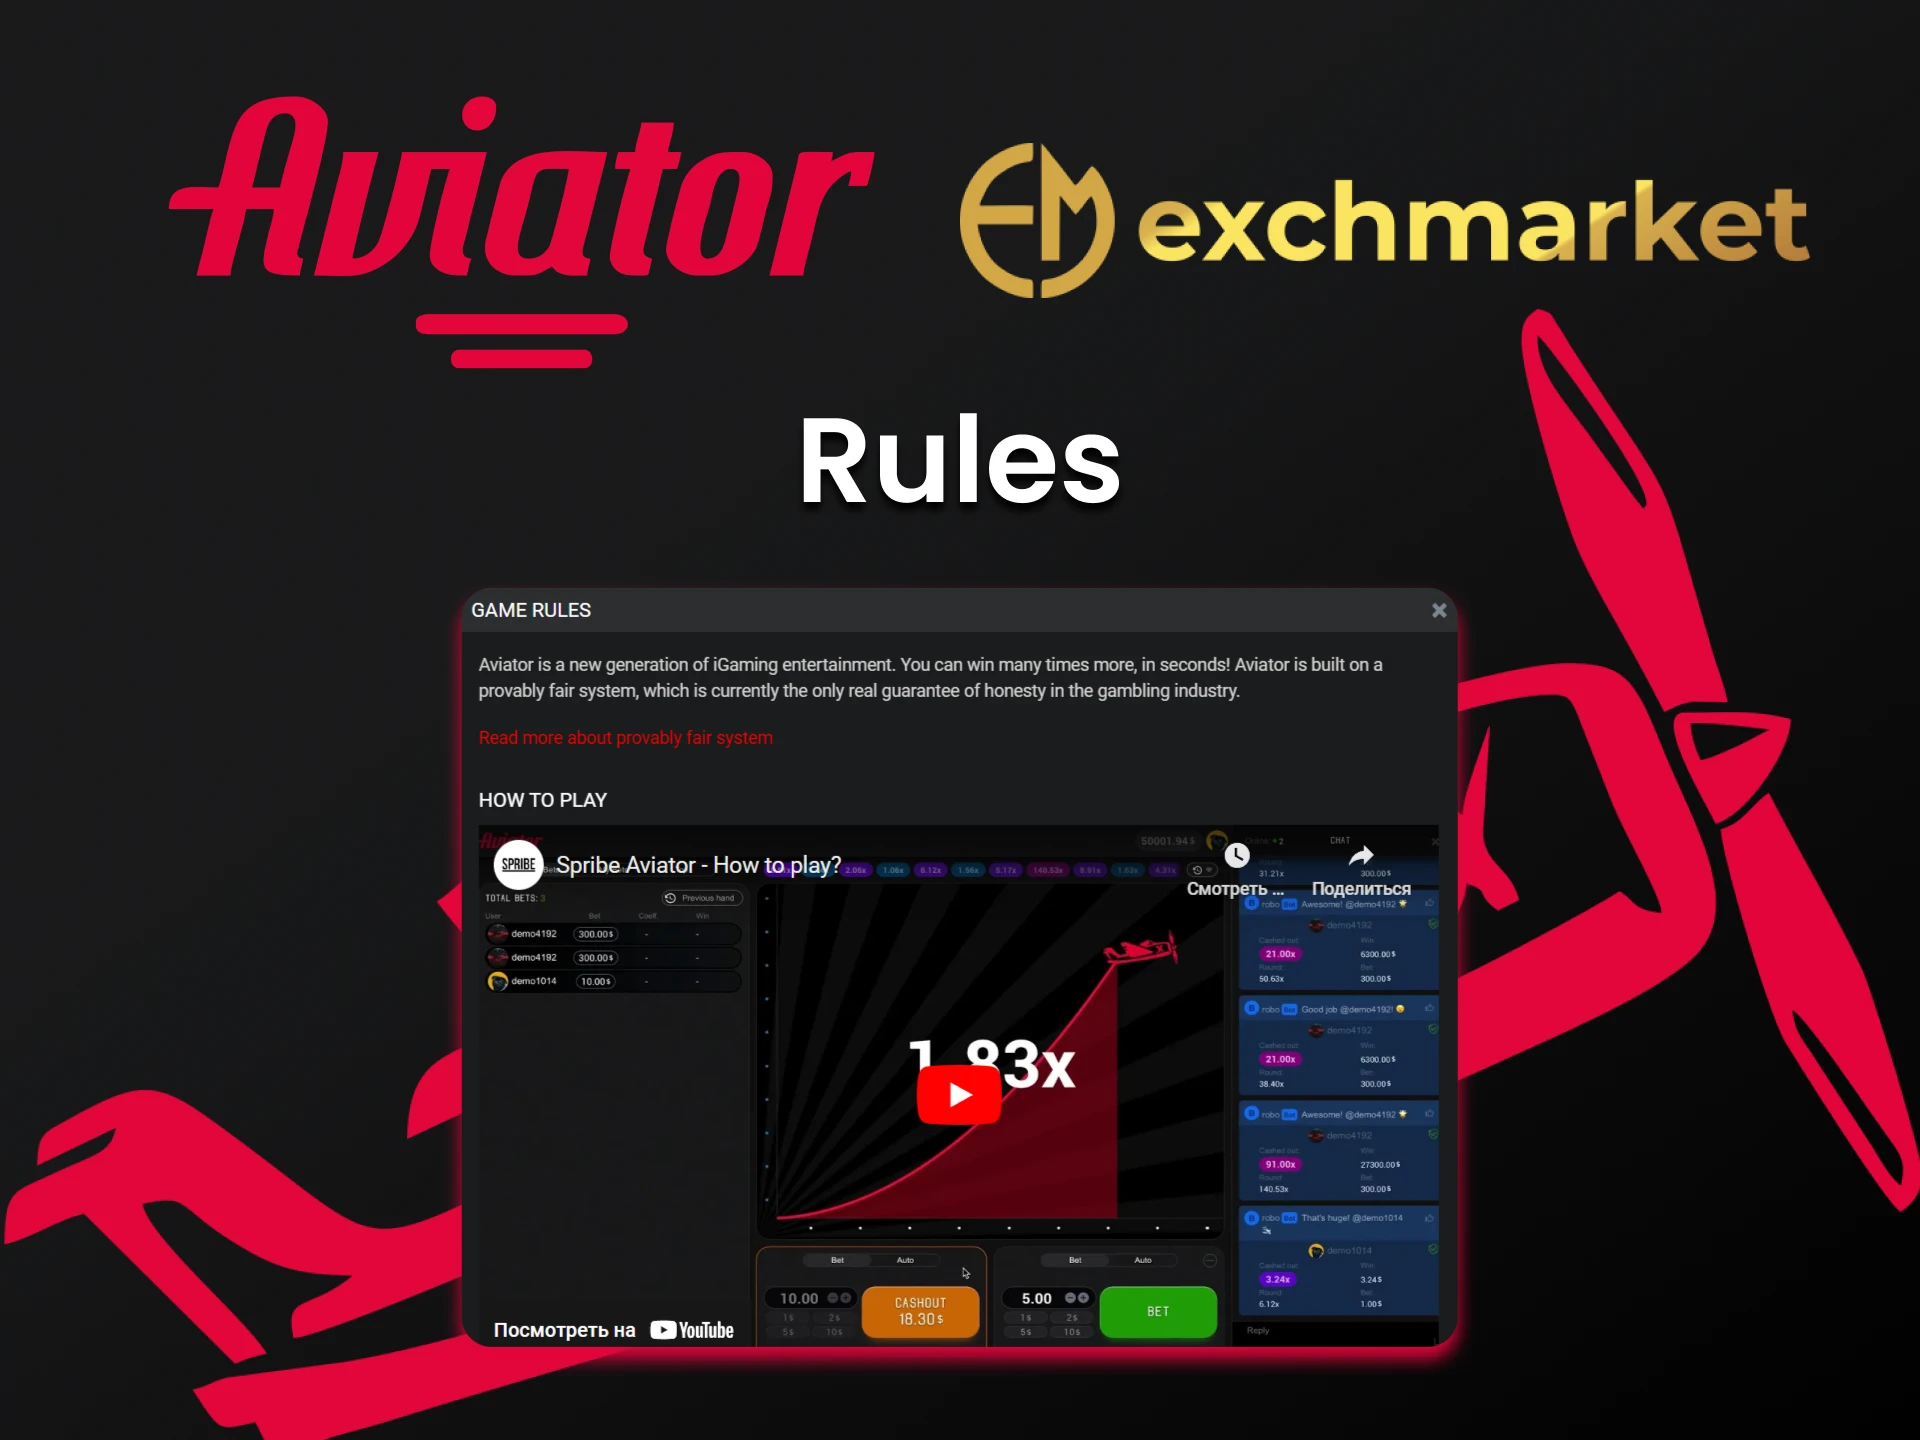 Learn how to win in Aviator on Exchmarket.